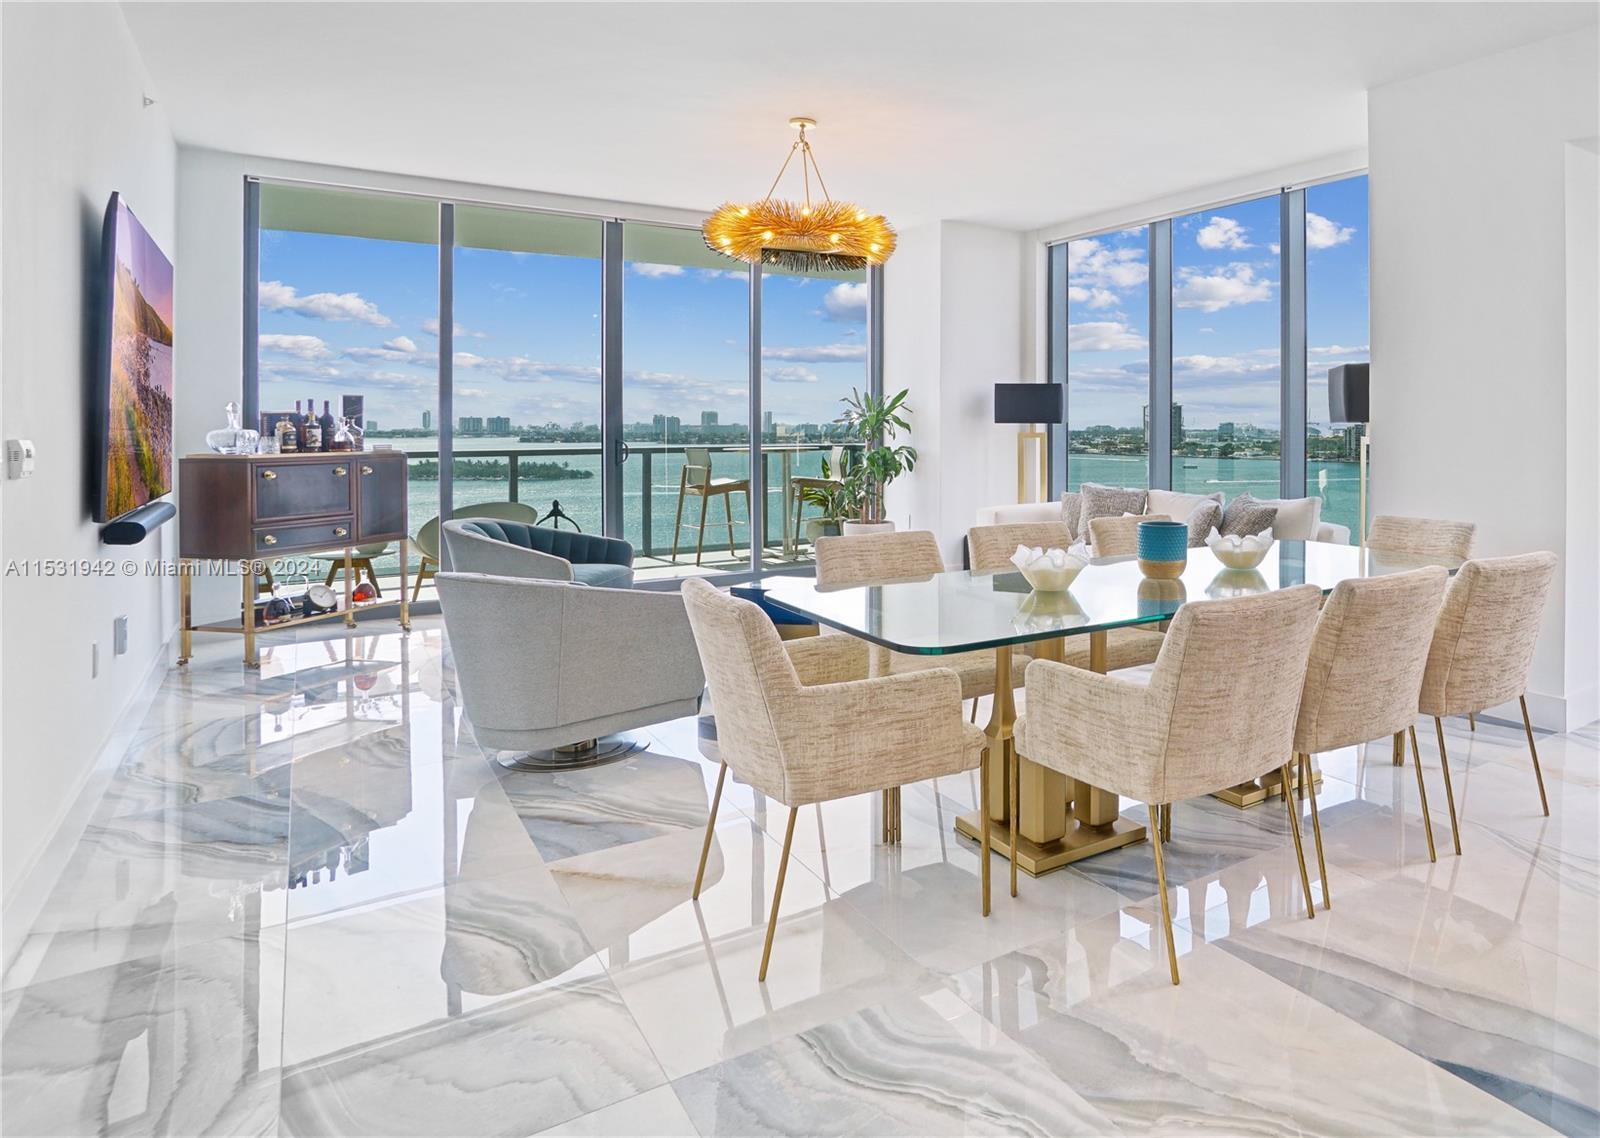 Welcome to your luxurious retreat in Edgewater, Florida! This stunning condo boasts 3 bedrooms,4.5 b